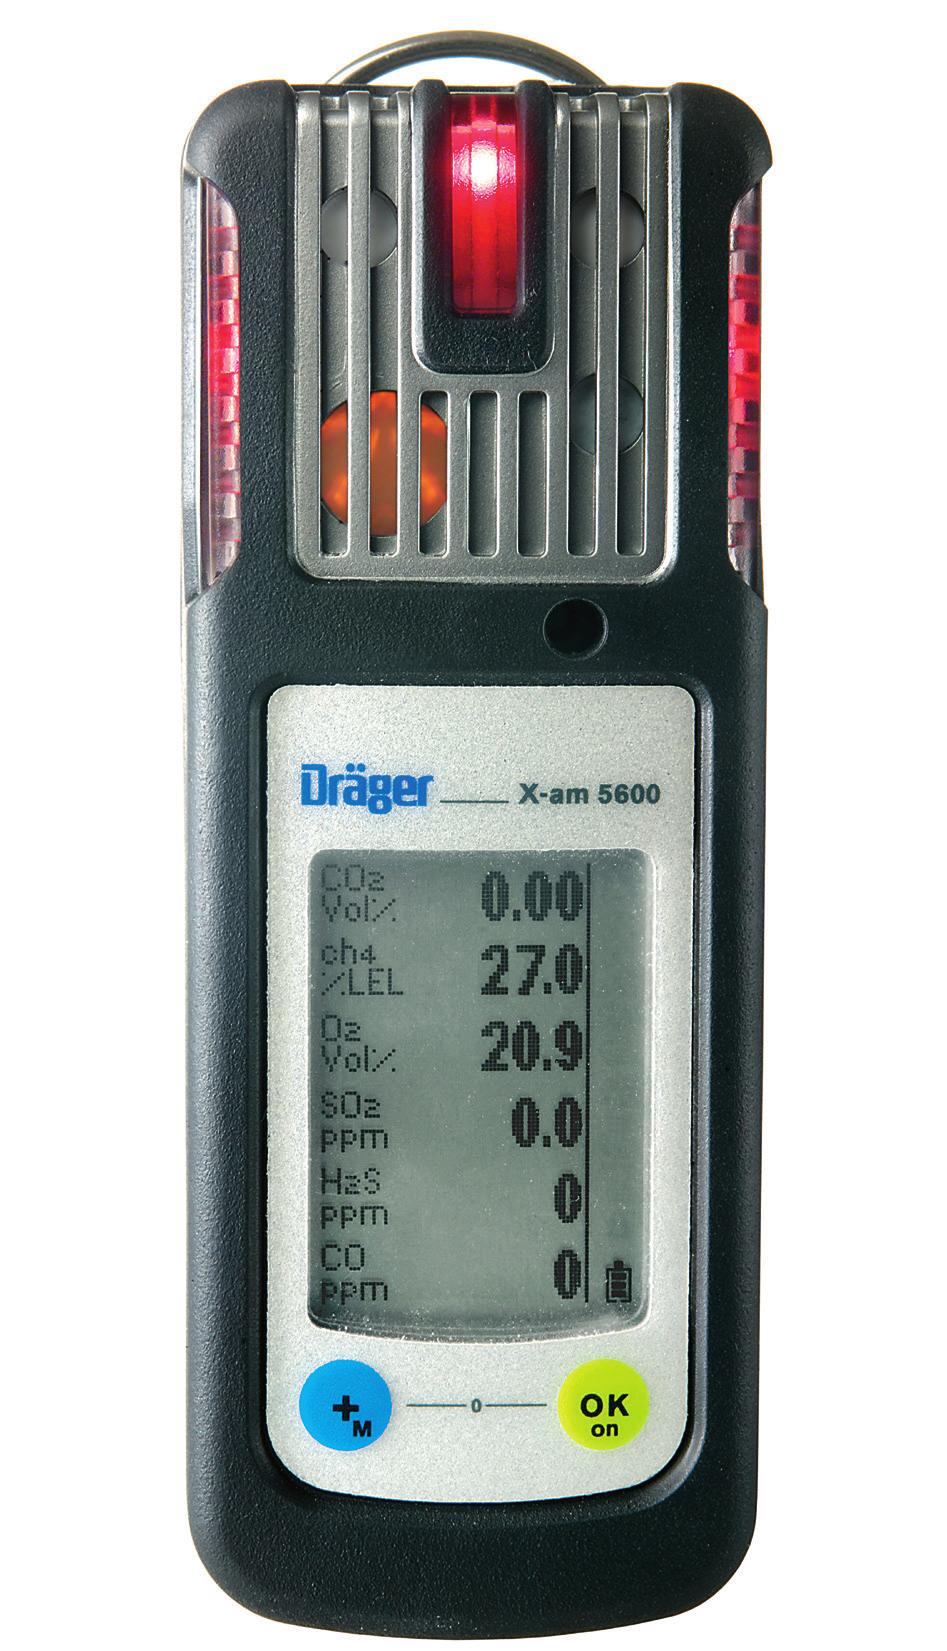 Dräger X-am 5600 Multi-Gas Detection Device Featuring an ergonomic design and innovative infrared sensor technology, the Dräger X-am 5600 is the smallest gas detection instrument for the measurement